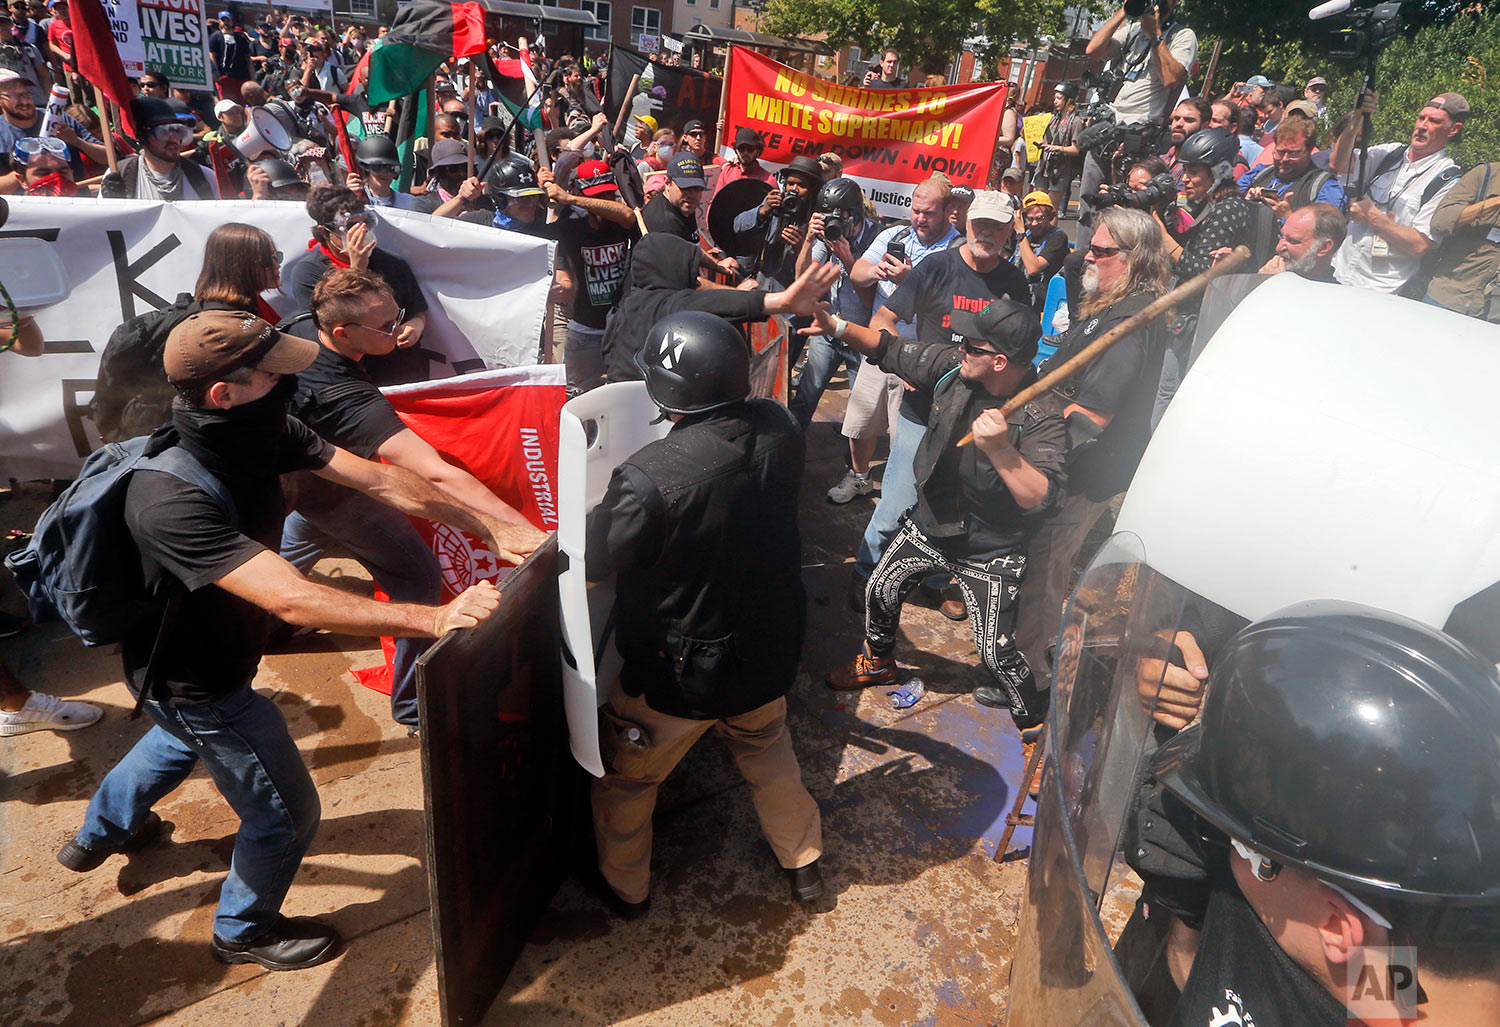  White nationalist demonstrators clash with counter demonstrators at the entrance to Lee Park in Charlottesville, Va., Saturday, Aug. 12, 2017. Gov. Terry McAuliffe declared a state of emergency and police dressed in riot gear ordered people to dispe